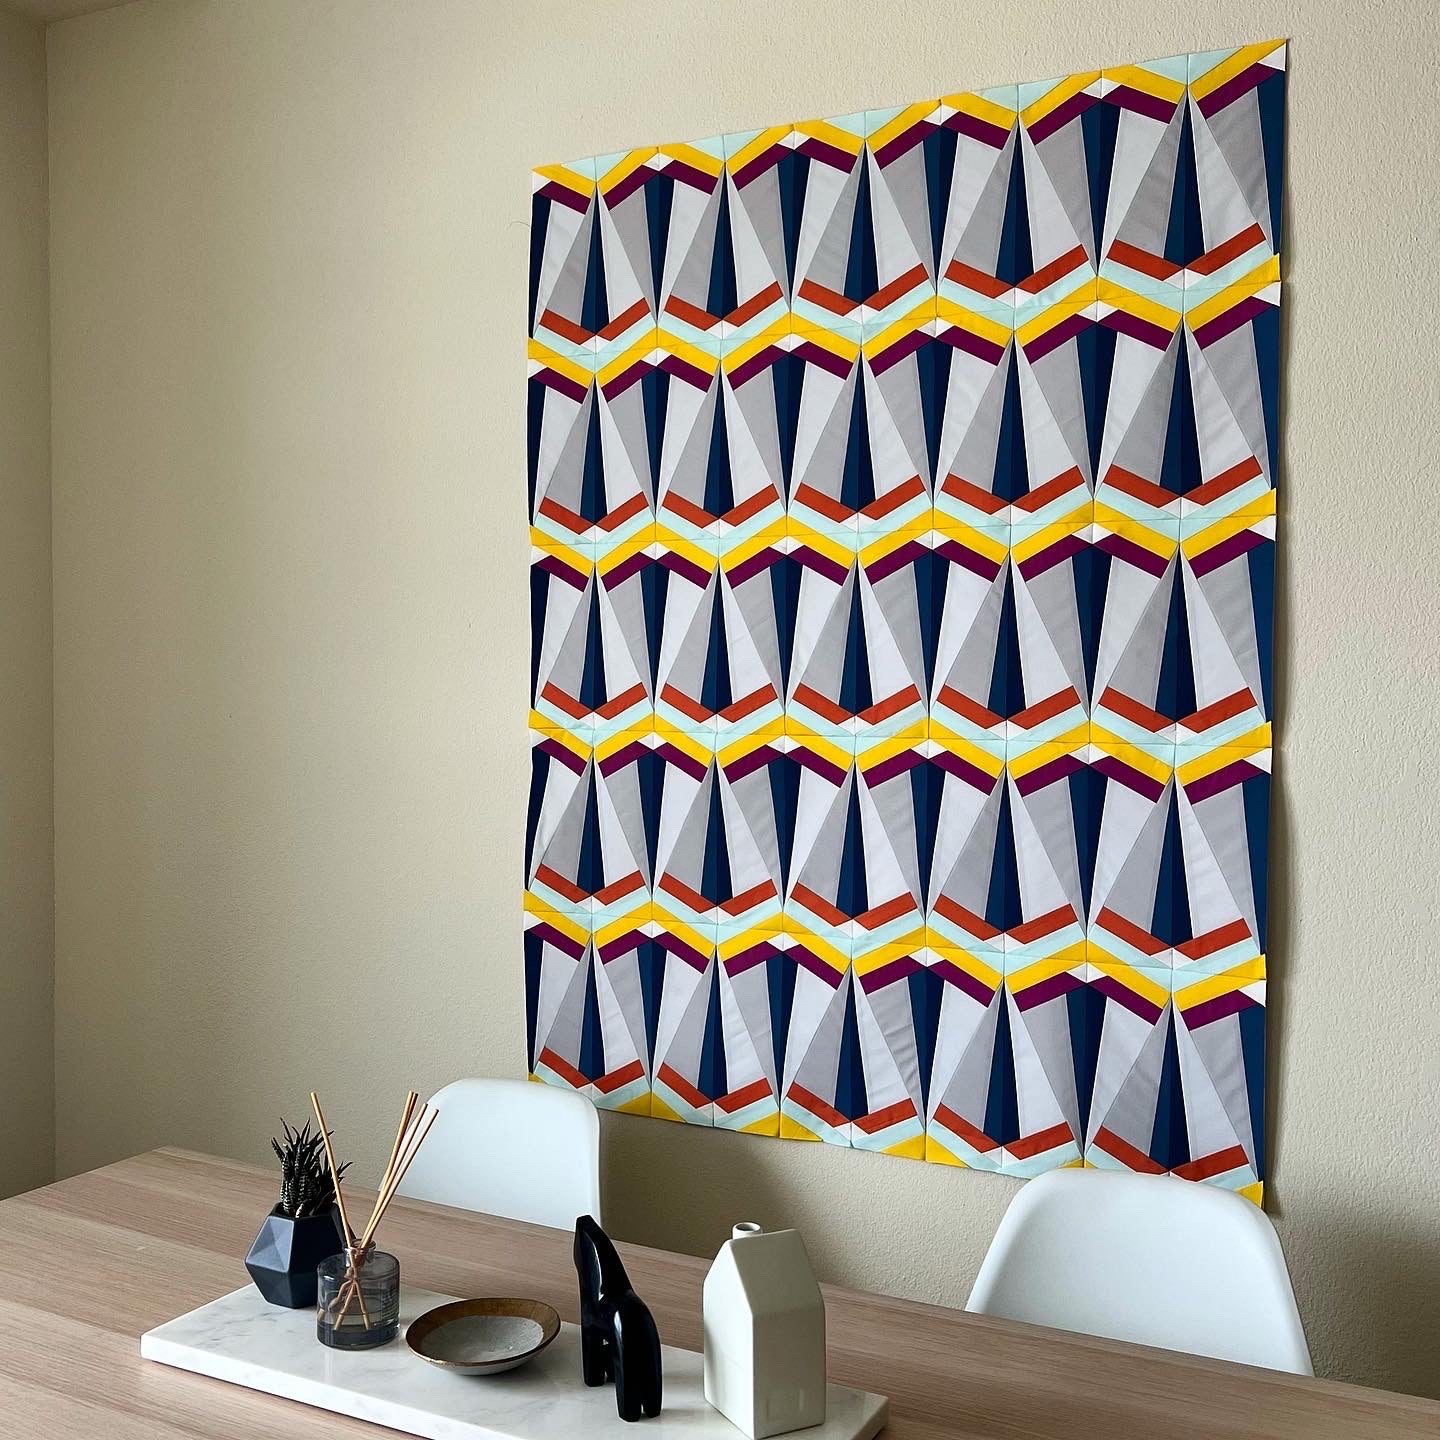 Skye Quilt Pattern - Julia Wachs Designs - A gray and yellow Skye quilt hung on a beige wall.